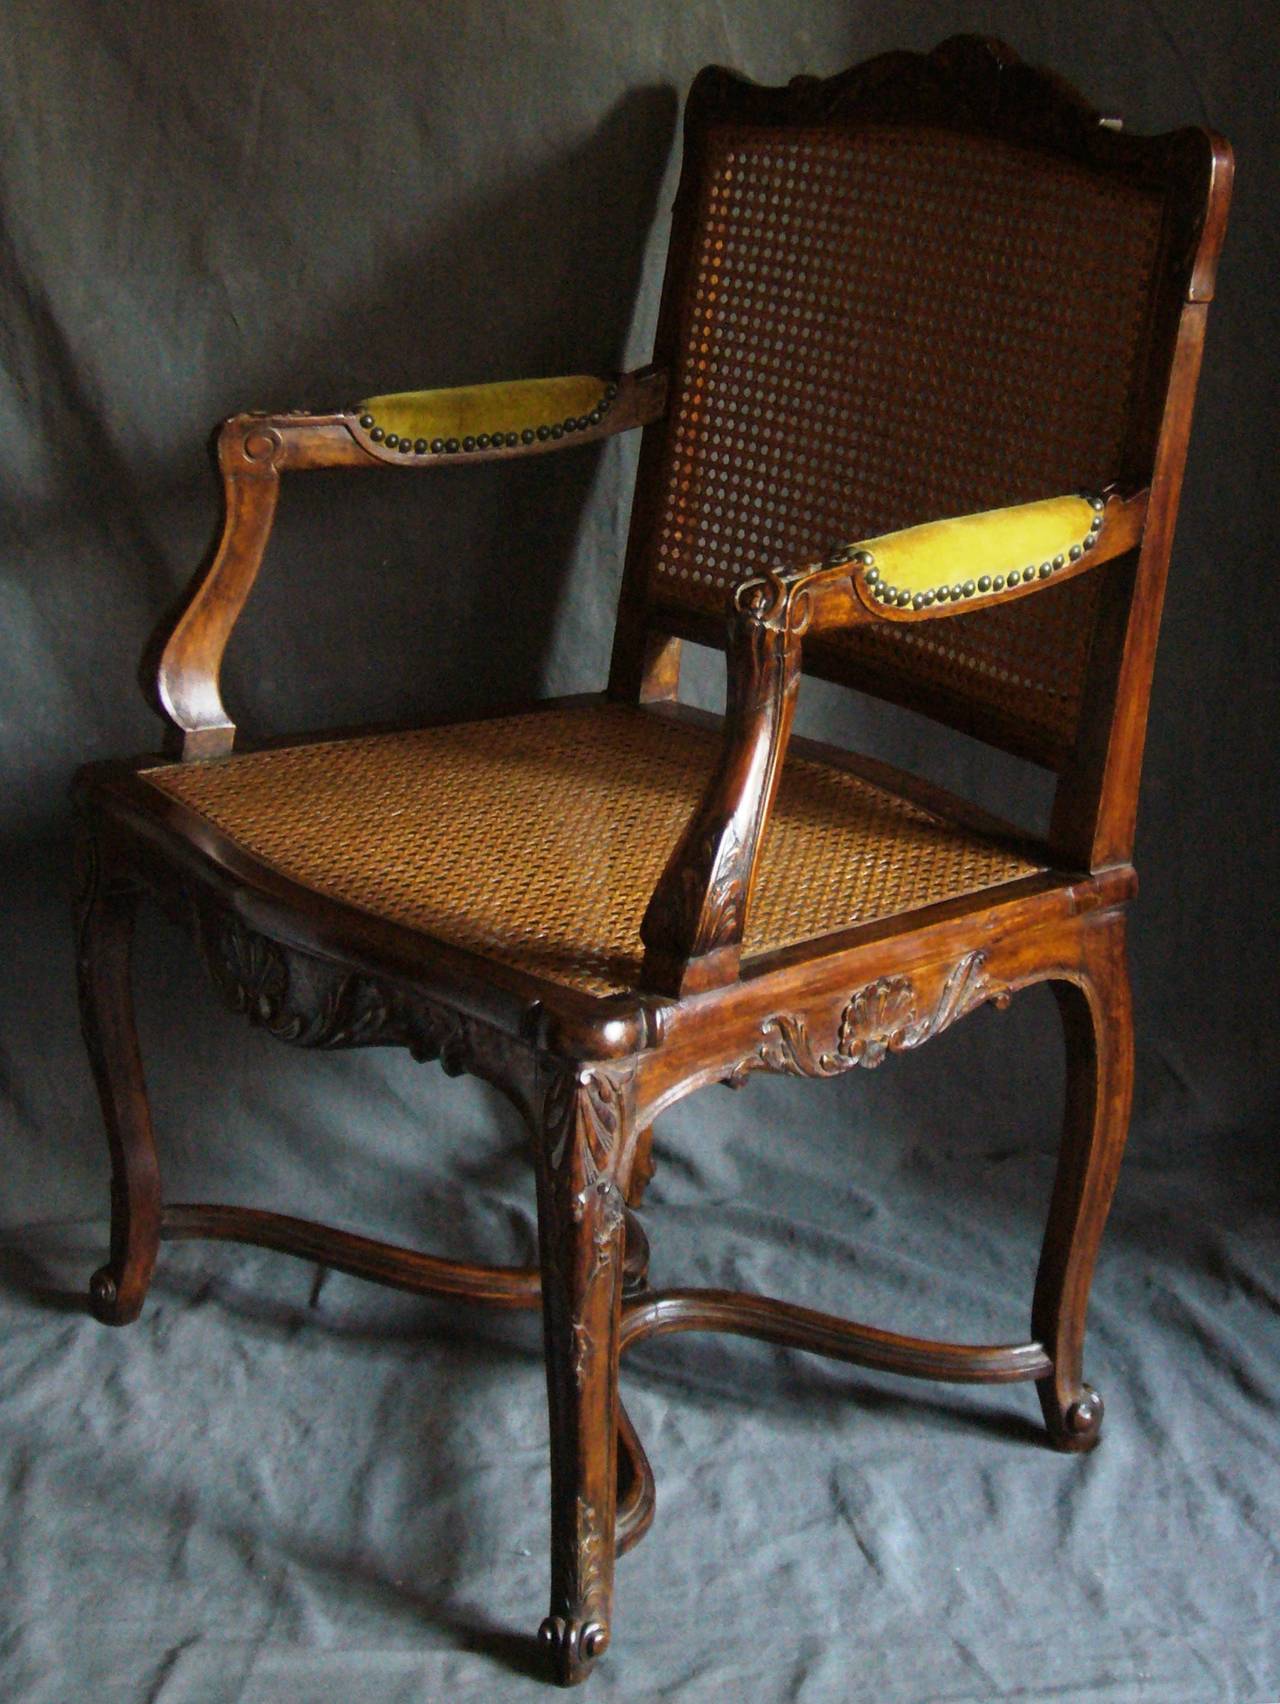 Pair of Louis XV style caned armchairs.  Pair of carved Louis XV style generously proportioned open armchairs, with caned backs, seats and upholstered armrests; with shell-carved back and apron and crossed stretchers. Early twentieth century.